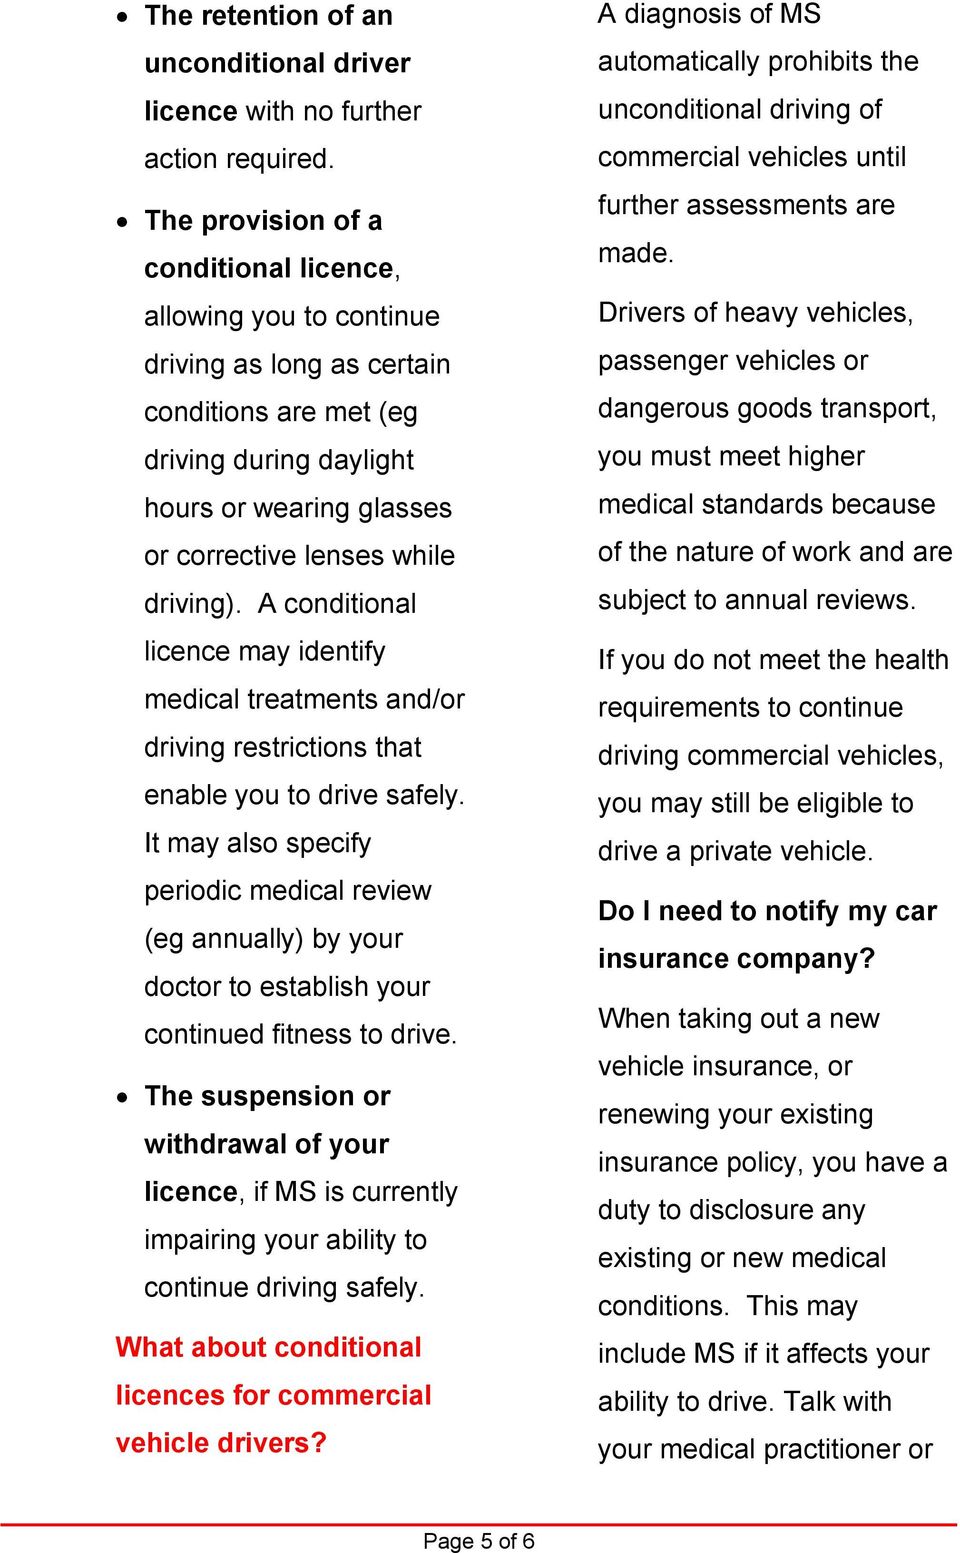 A conditional licence may identify medical treatments and/or driving restrictions that enable you to drive safely.